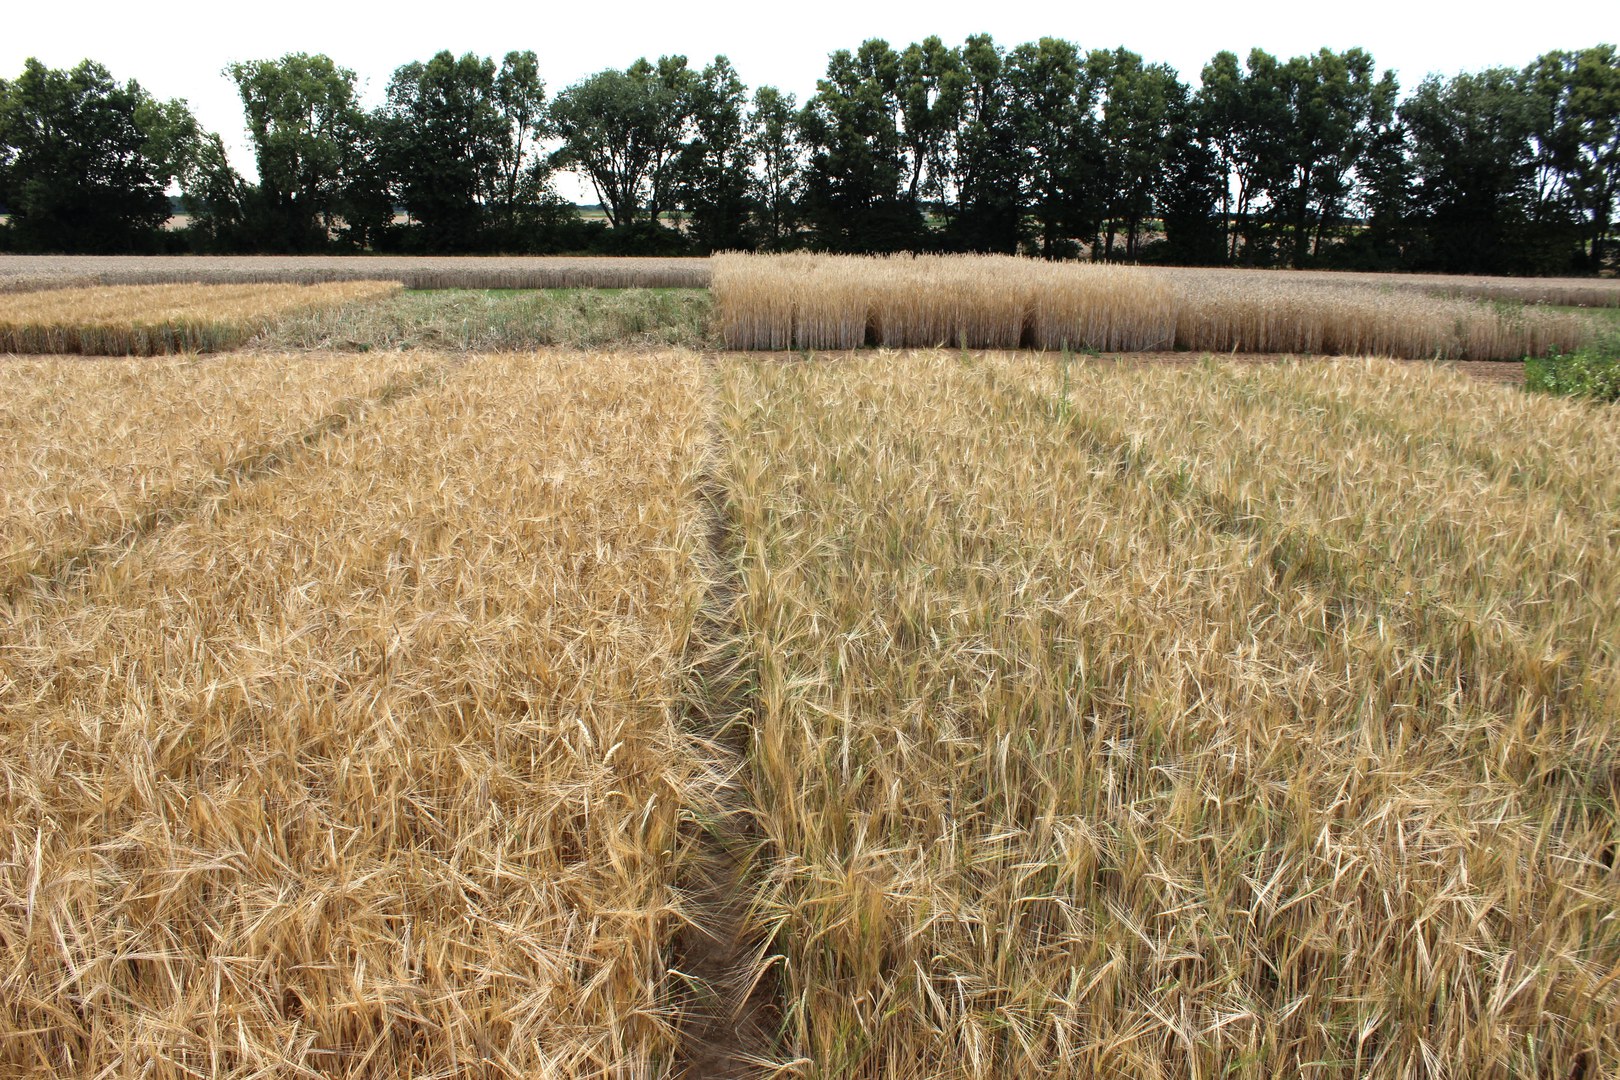 The conventional population on the left and the organic barley on the right: